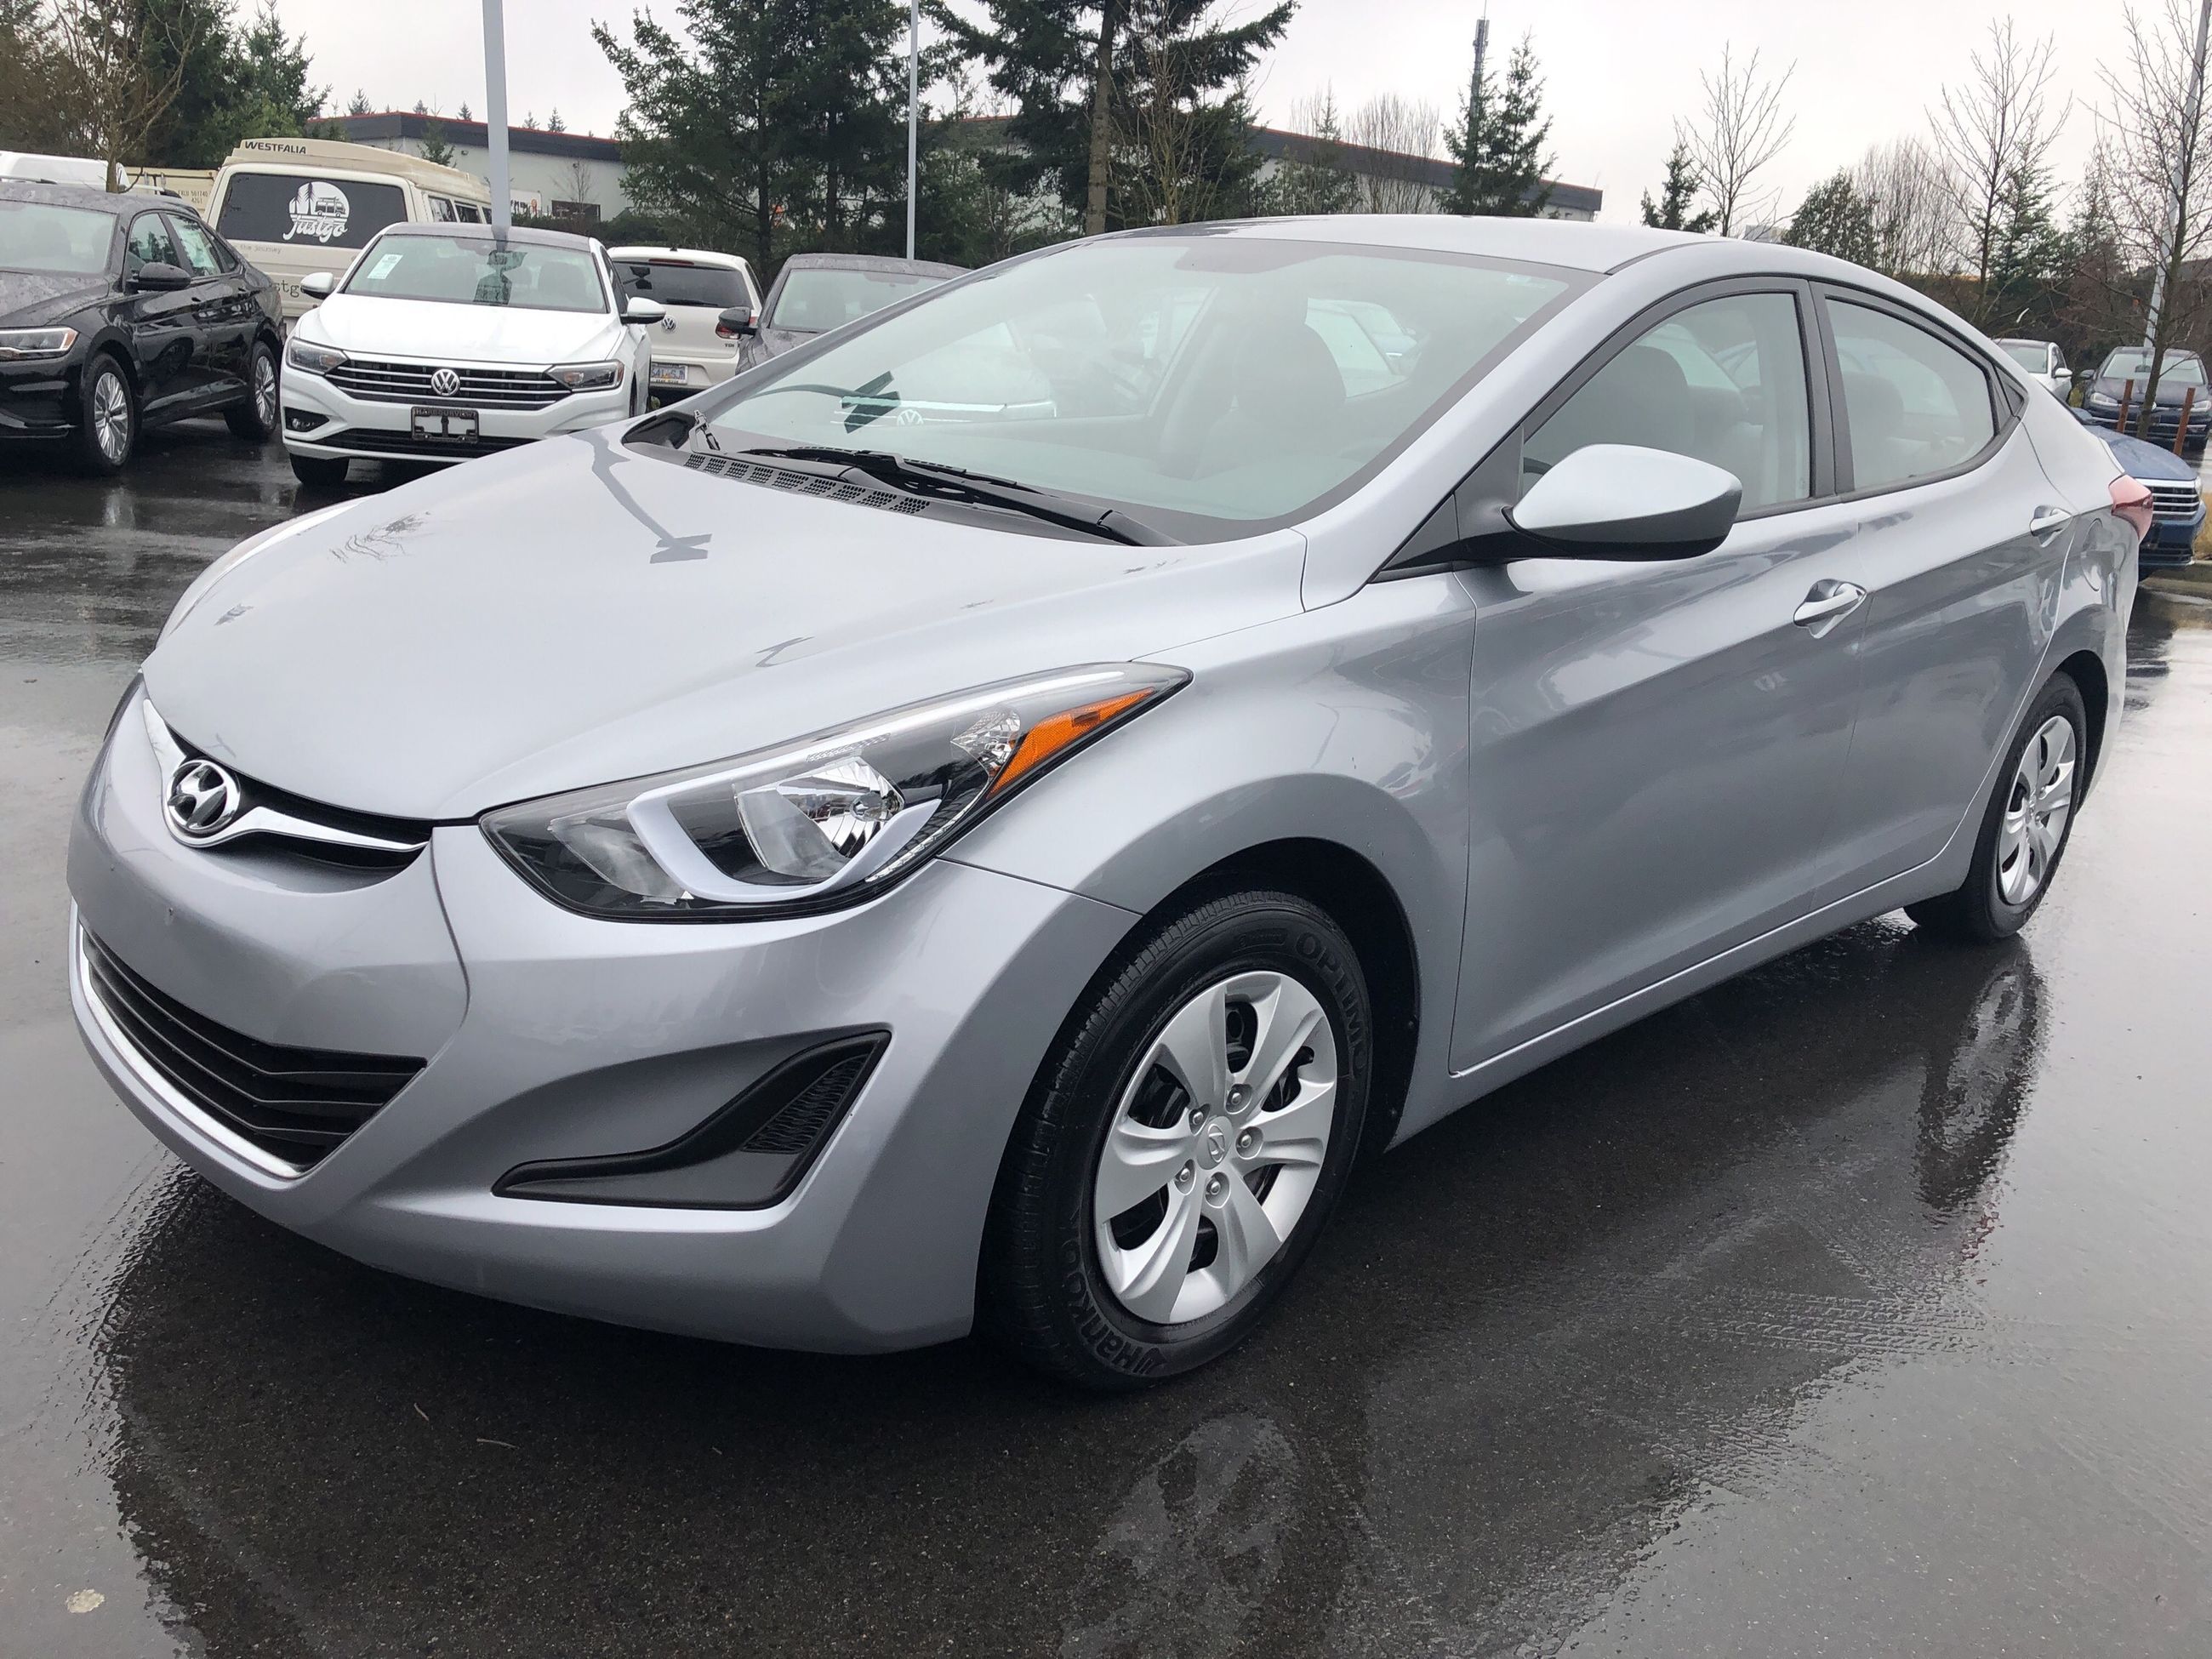 Used 2015 Hyundai Elantra L for Sale 9995 Harbourview VW